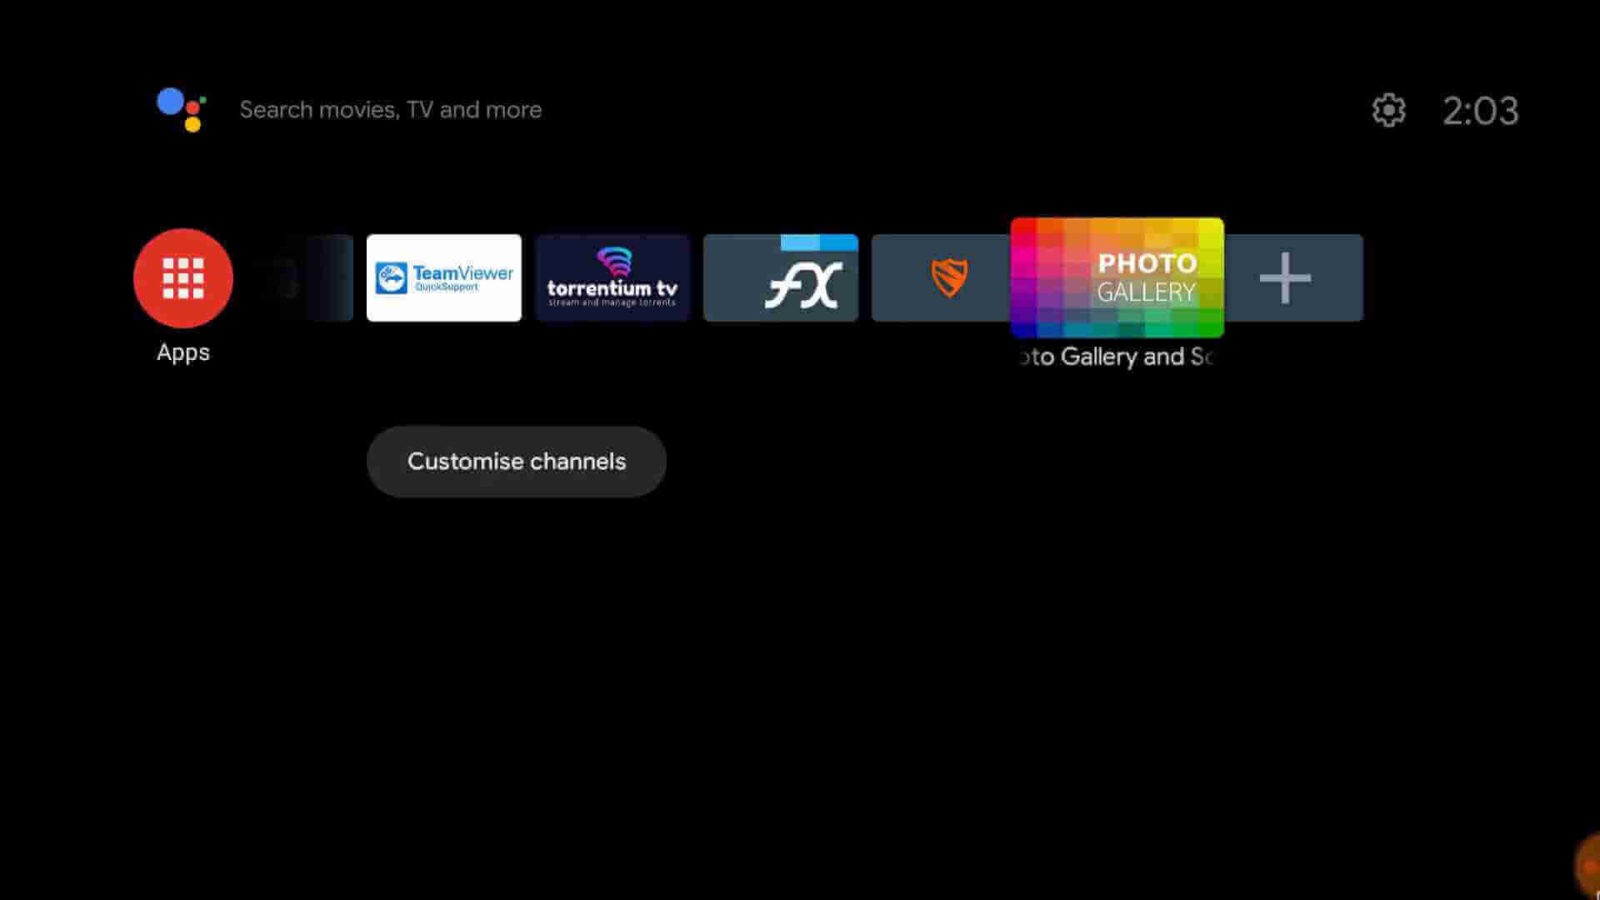 Photo Gallery On Android TV